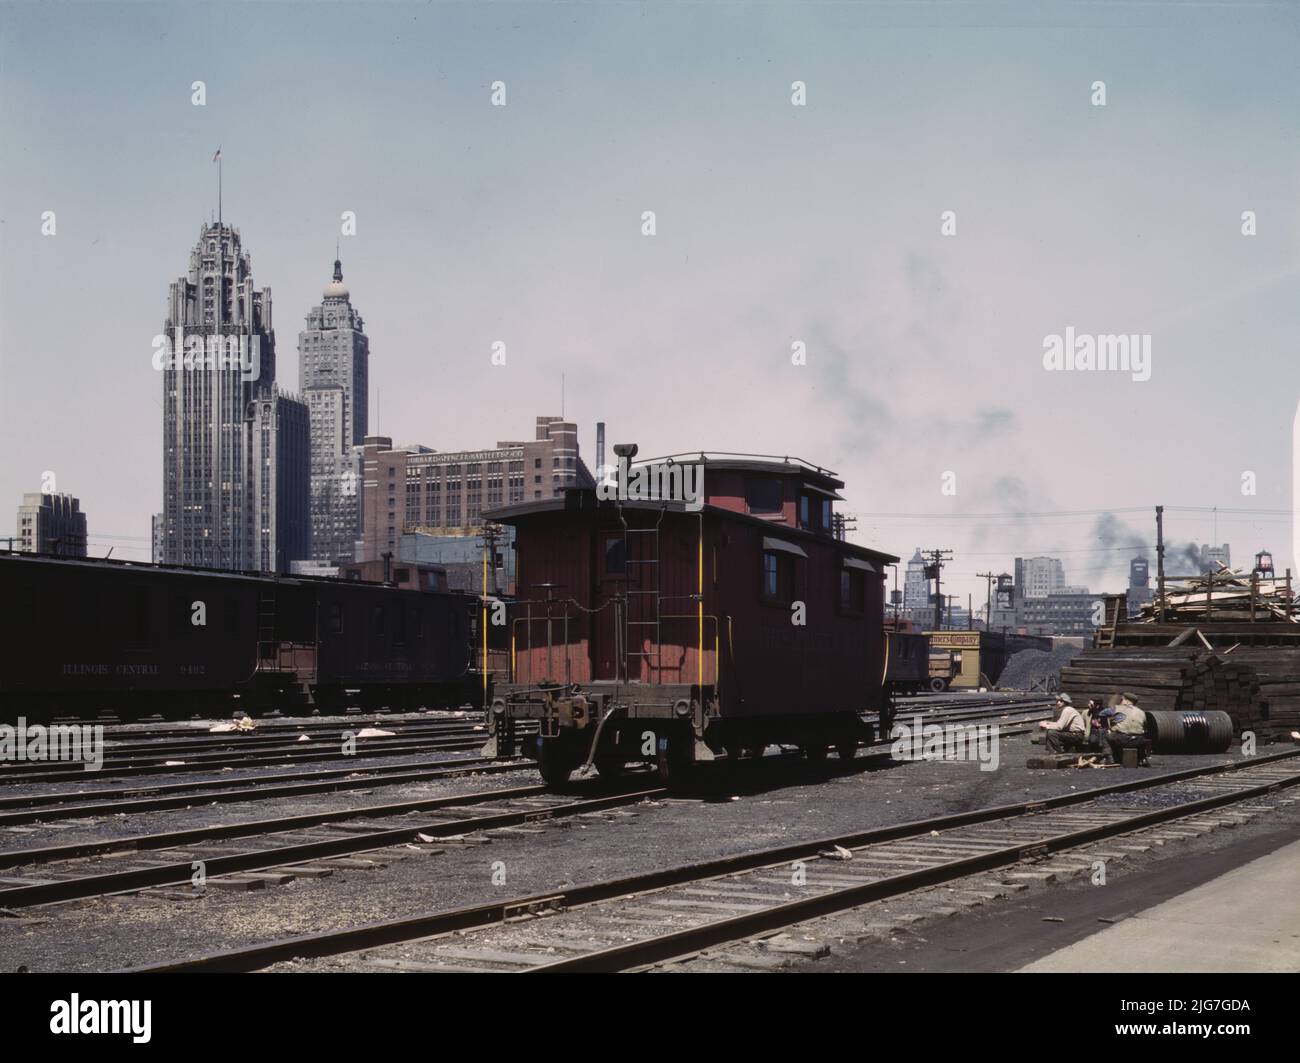 General view of part of the south Water street freight depot of the Illinois Central Railroad, Chicago, Ill. A C and O R.R. [Chesapeake and Ohio Railway] caboose. the C and O is one of the railroads that lease terminal facilities from the I.C.R.R [Illinois Central Railroad]. Stock Photo